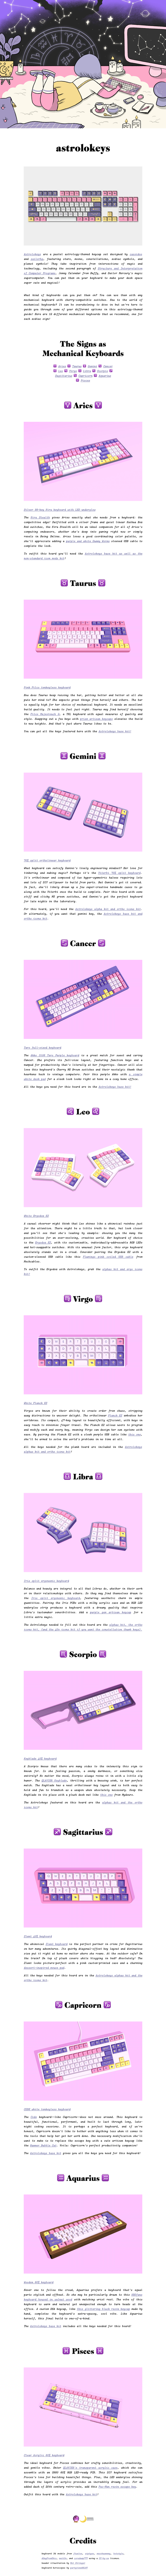 astrolokeys Landing Page Example: Astrolokeys are a pastel astrology-themed keycap set designed by cassidoo and sailorhg, featuring stars, moons, constellations, zodiac symbols, and planet symbols! They take inspiration from intersections of magic and technology, including the second paragraph of Structure and Interpretation of Computer Programs, Jenny Calendar from Buffy, and Sailor Mercury's magic supercomputer. You can put them on your keyboard to make your desk space super cute and magical! 